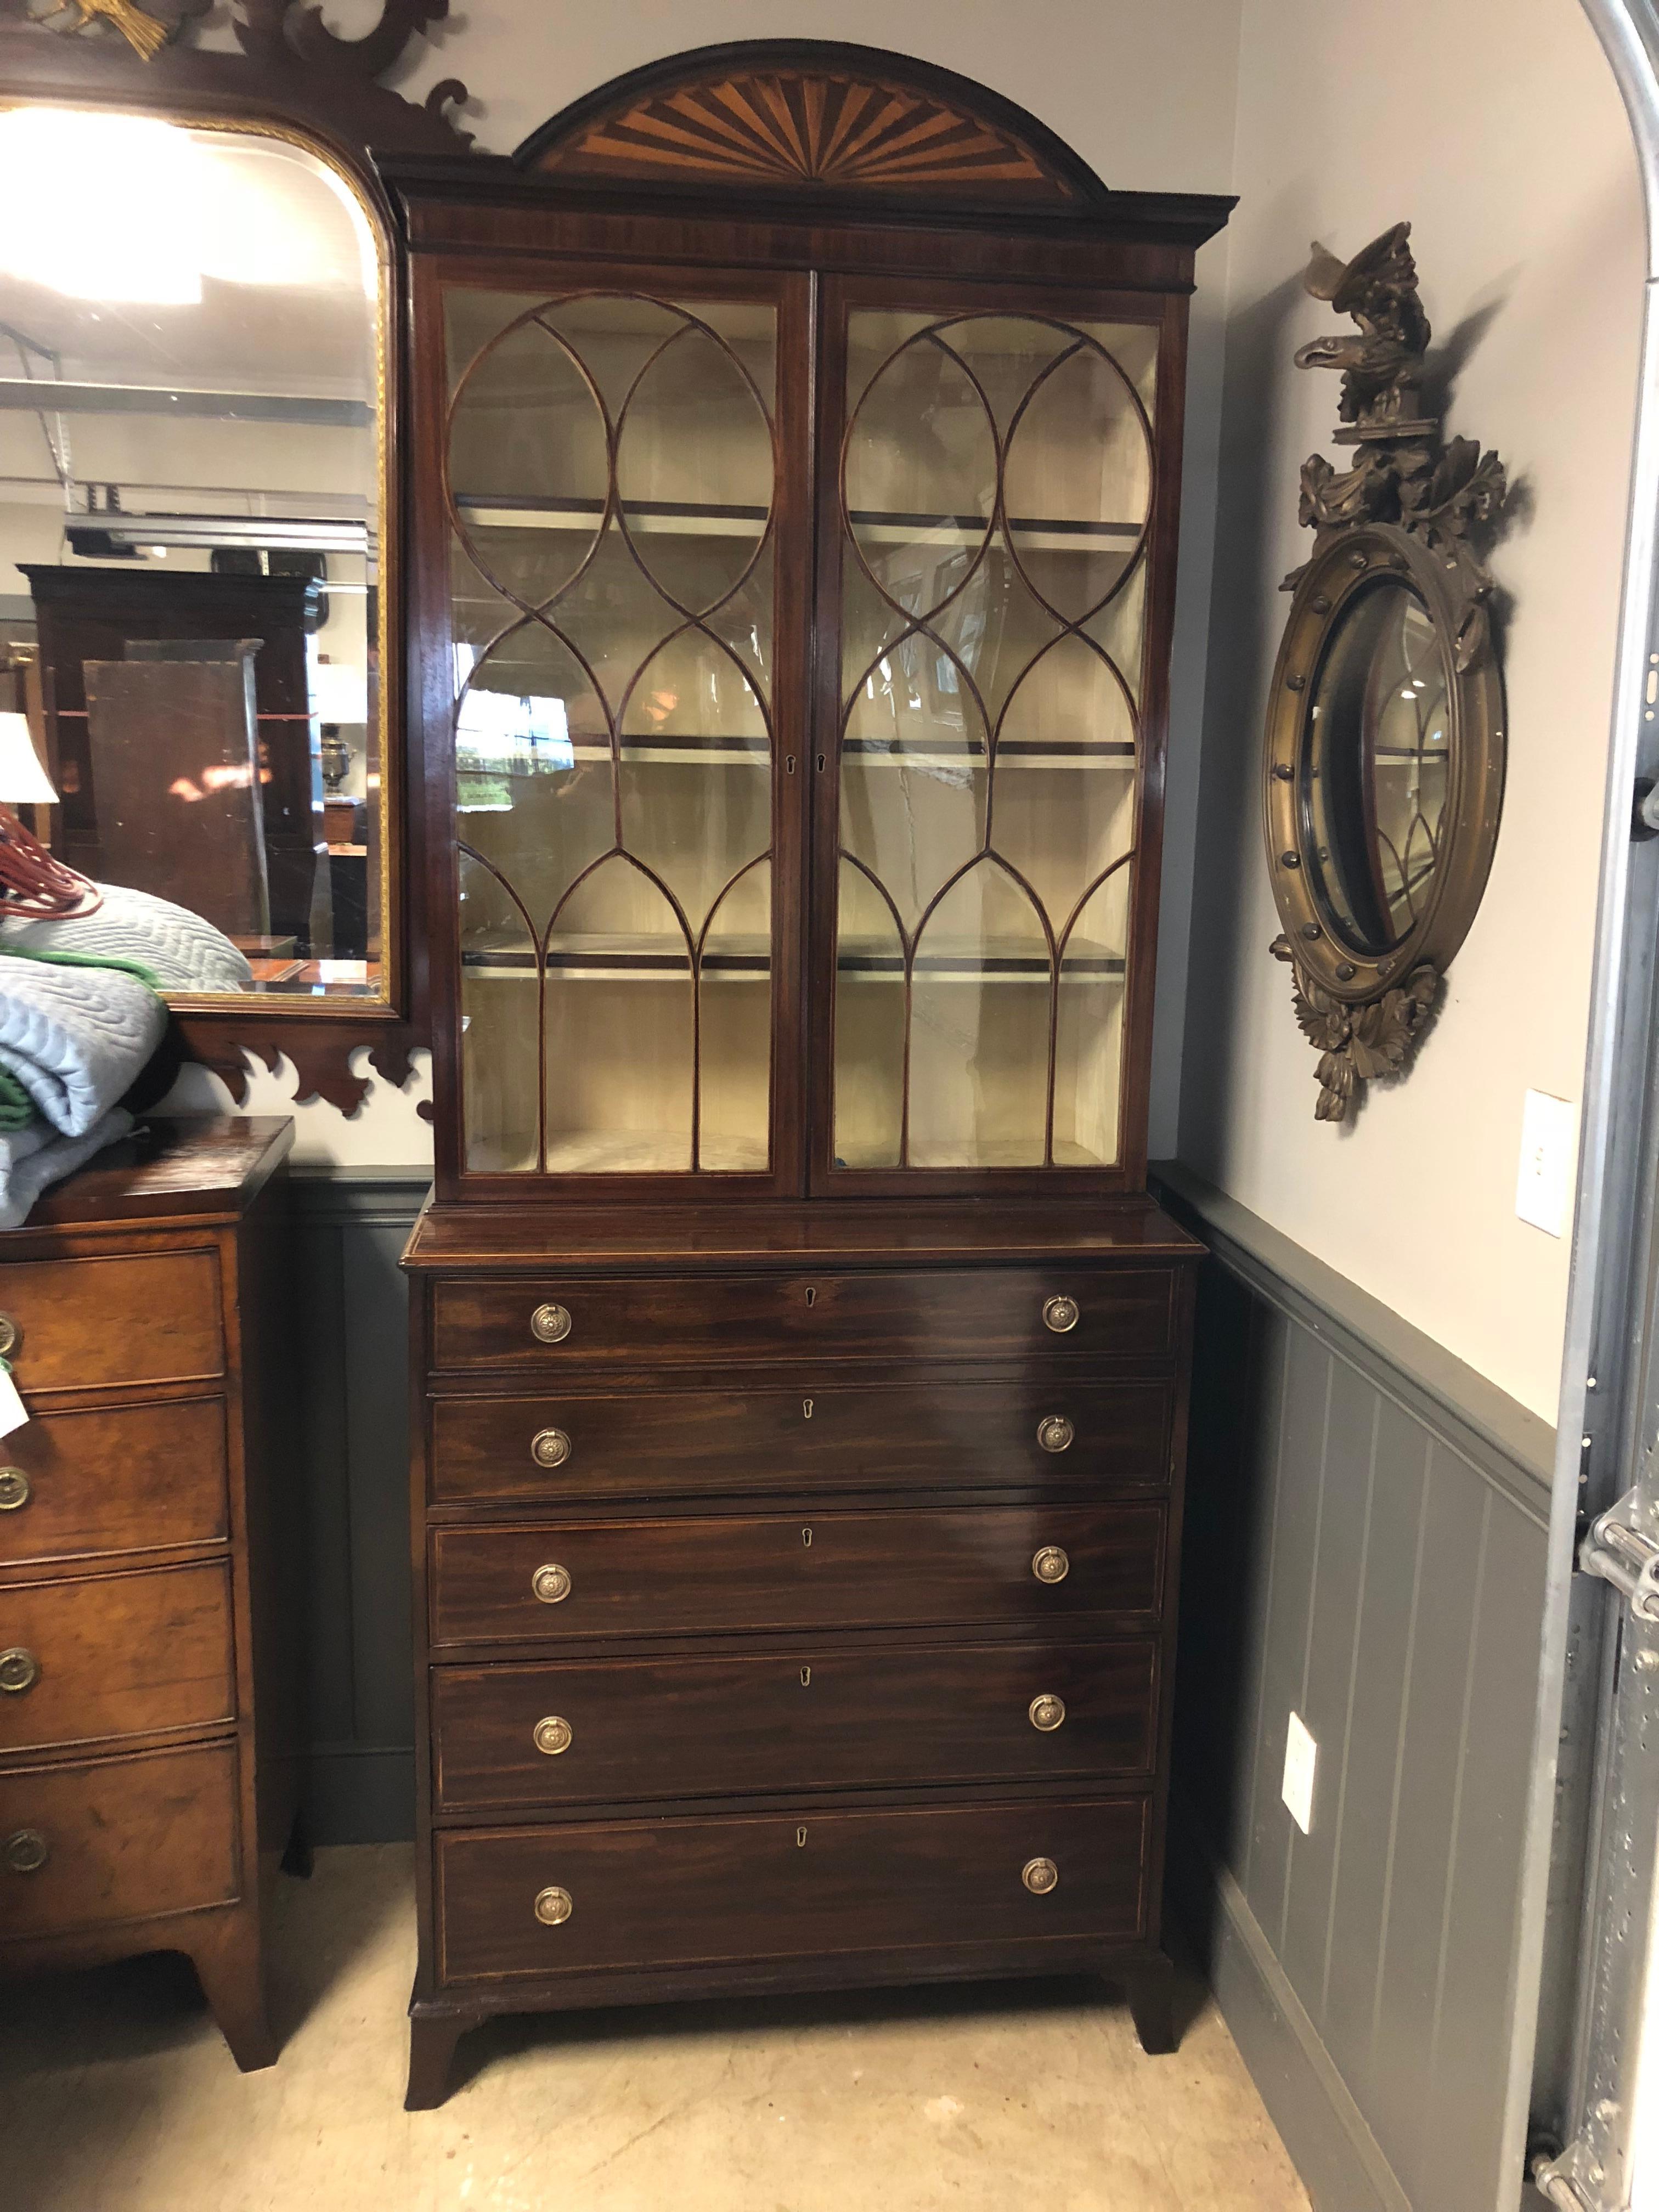 English Butler's secretary in dark mahogany with inlay stringing on each drawer and around the top edge, incredible fan centered on the cornice with inlaid woods, beautiful glass pattern with inlaid mahogany, interior pigeon holes and leather,